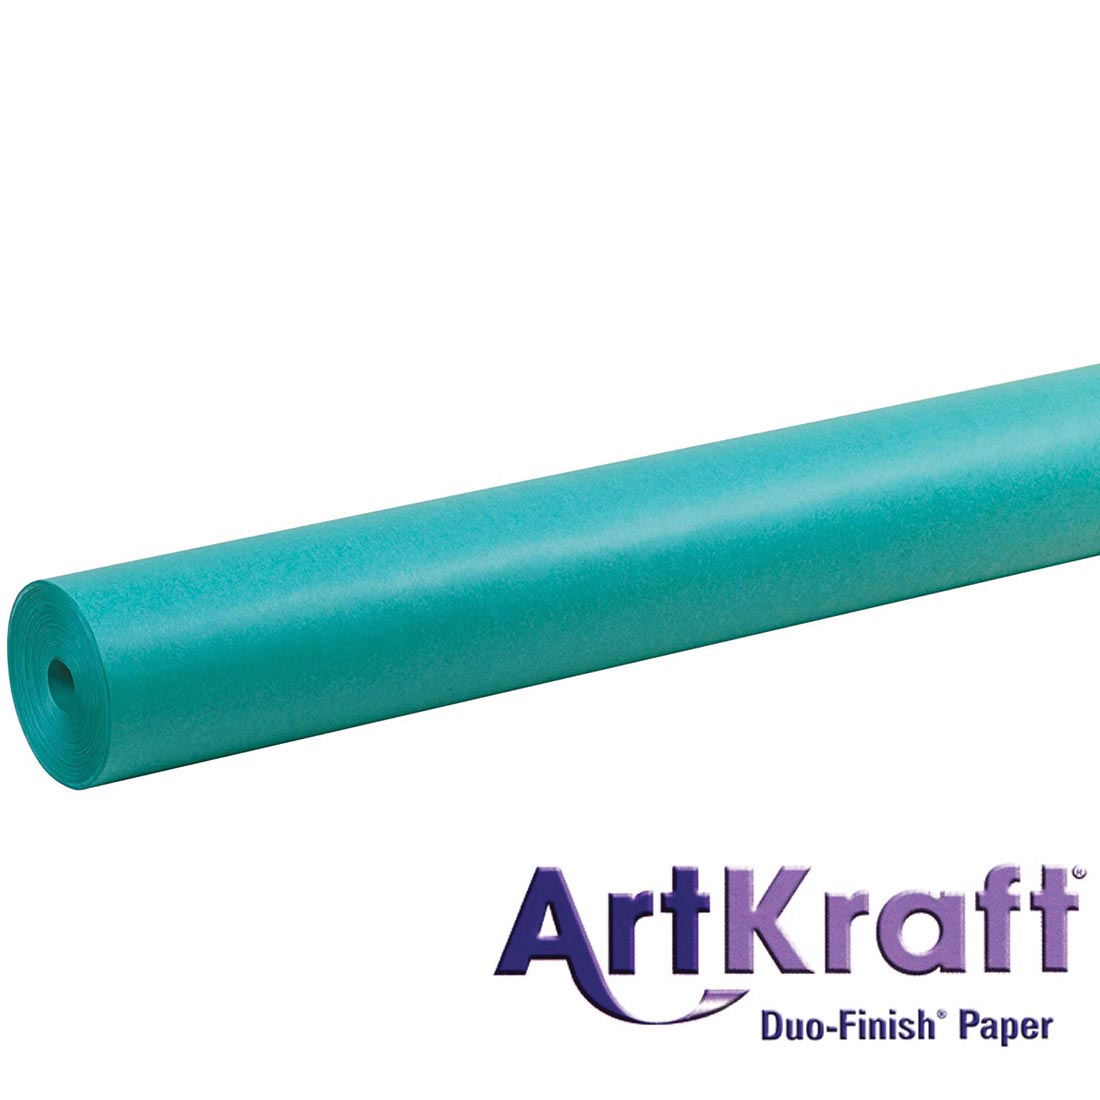 Roll of Aqua Paper with text ArtKraft Duo-Finish Paper